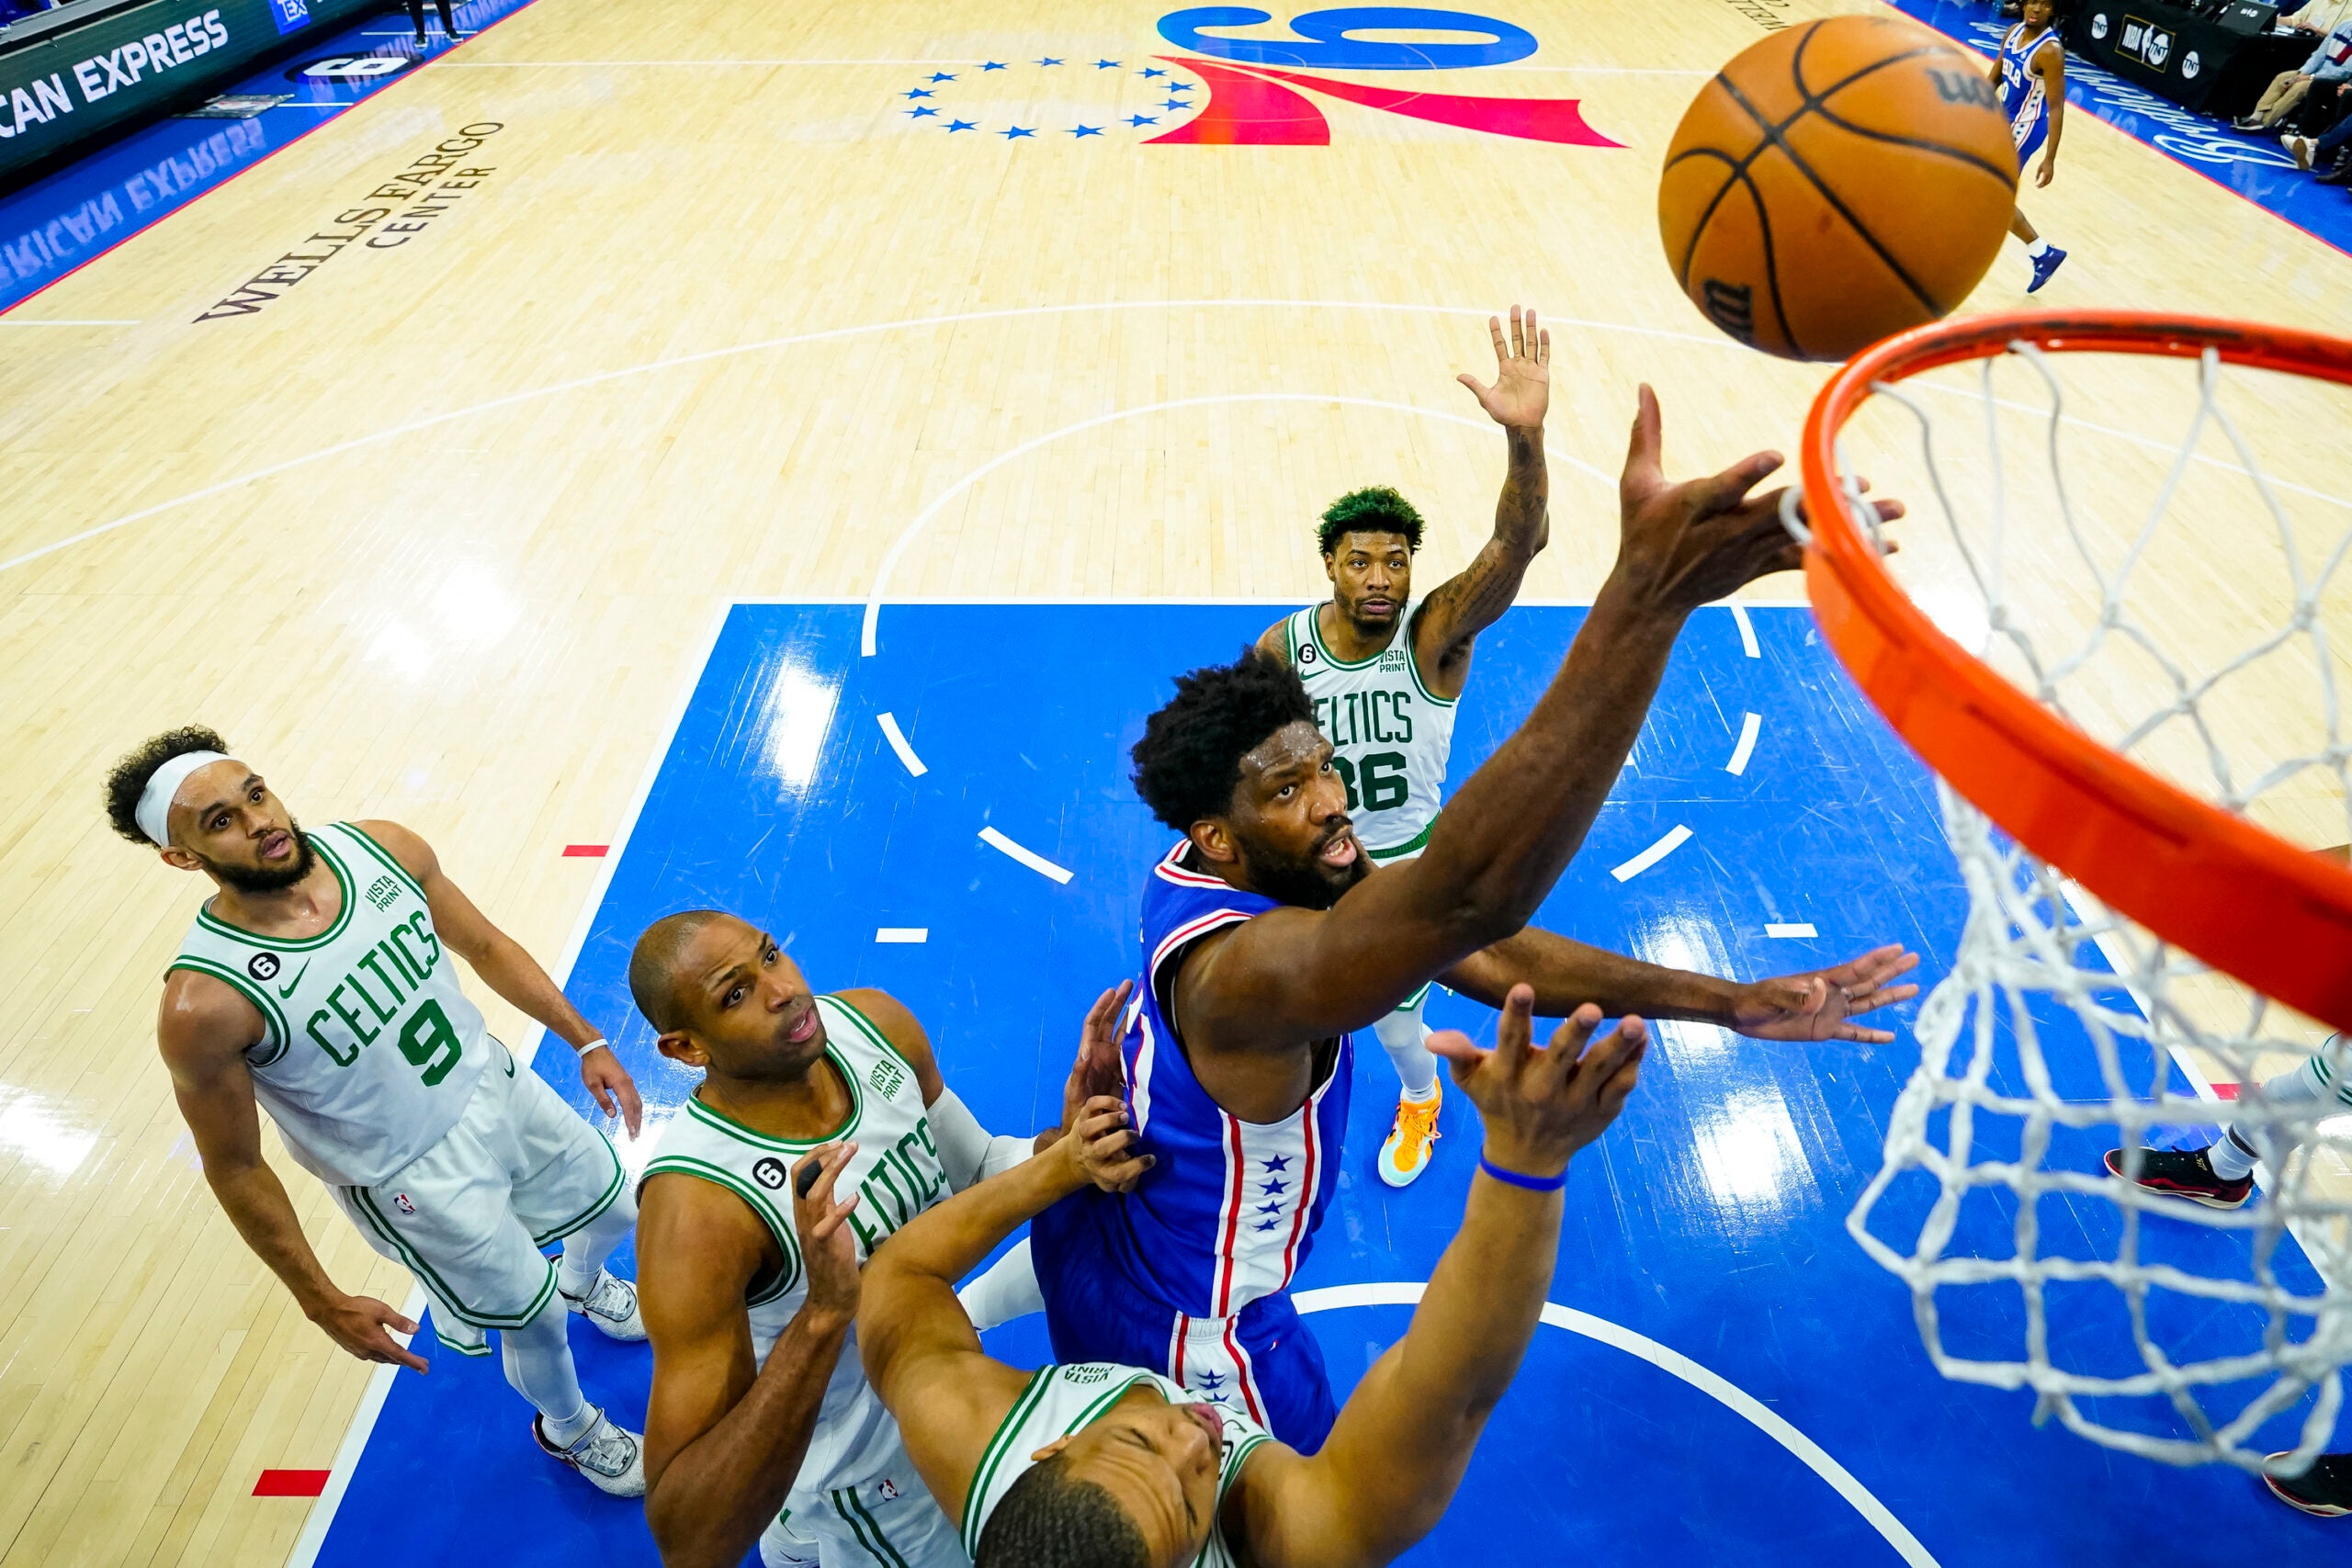 Joel Embiid surrounded by four Celtics players.